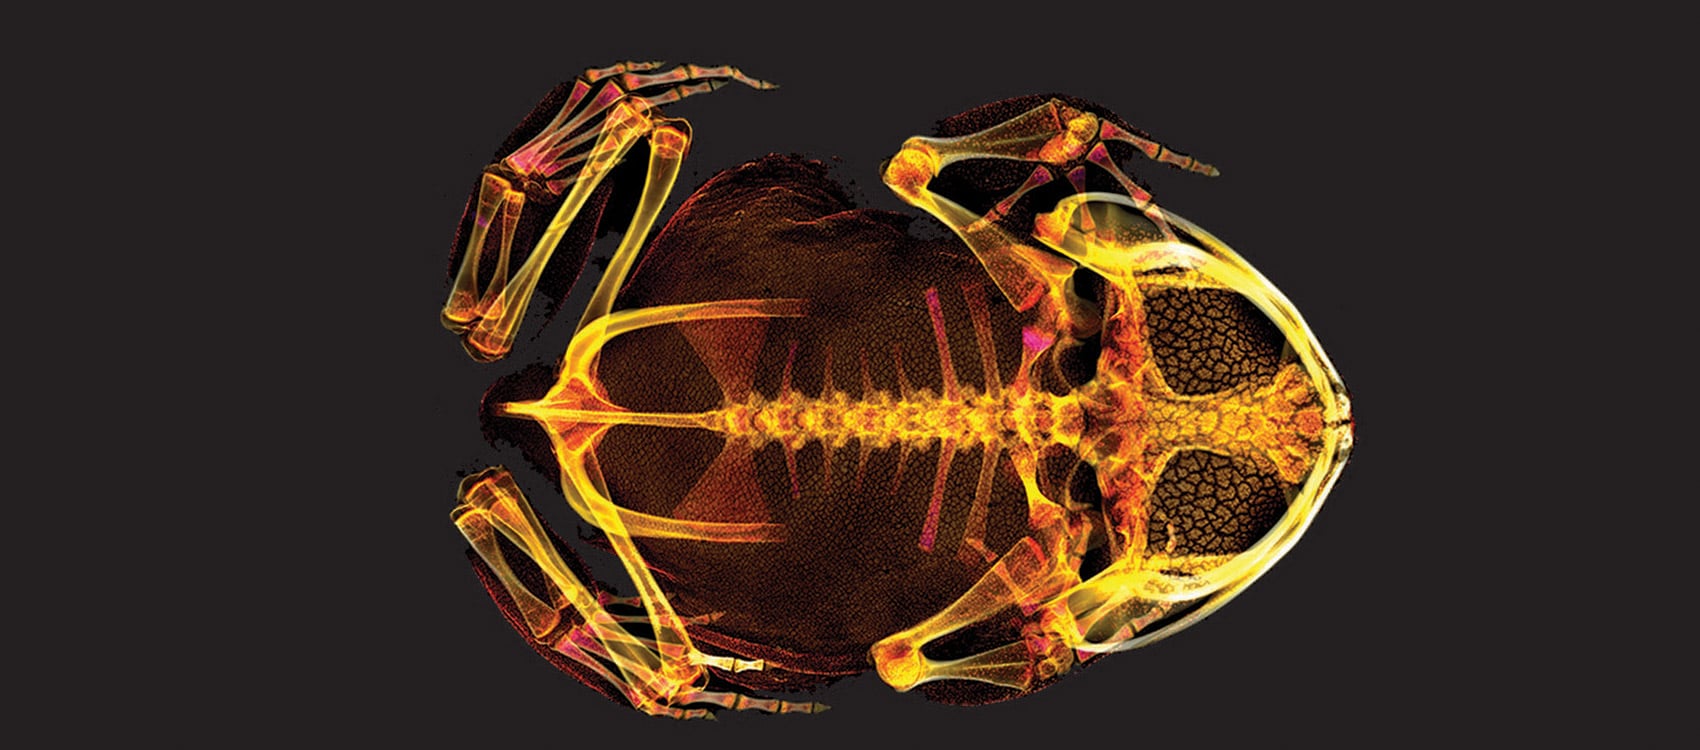 Scientists have scanned thousands of animals in 3D, which is accessible to everyone

